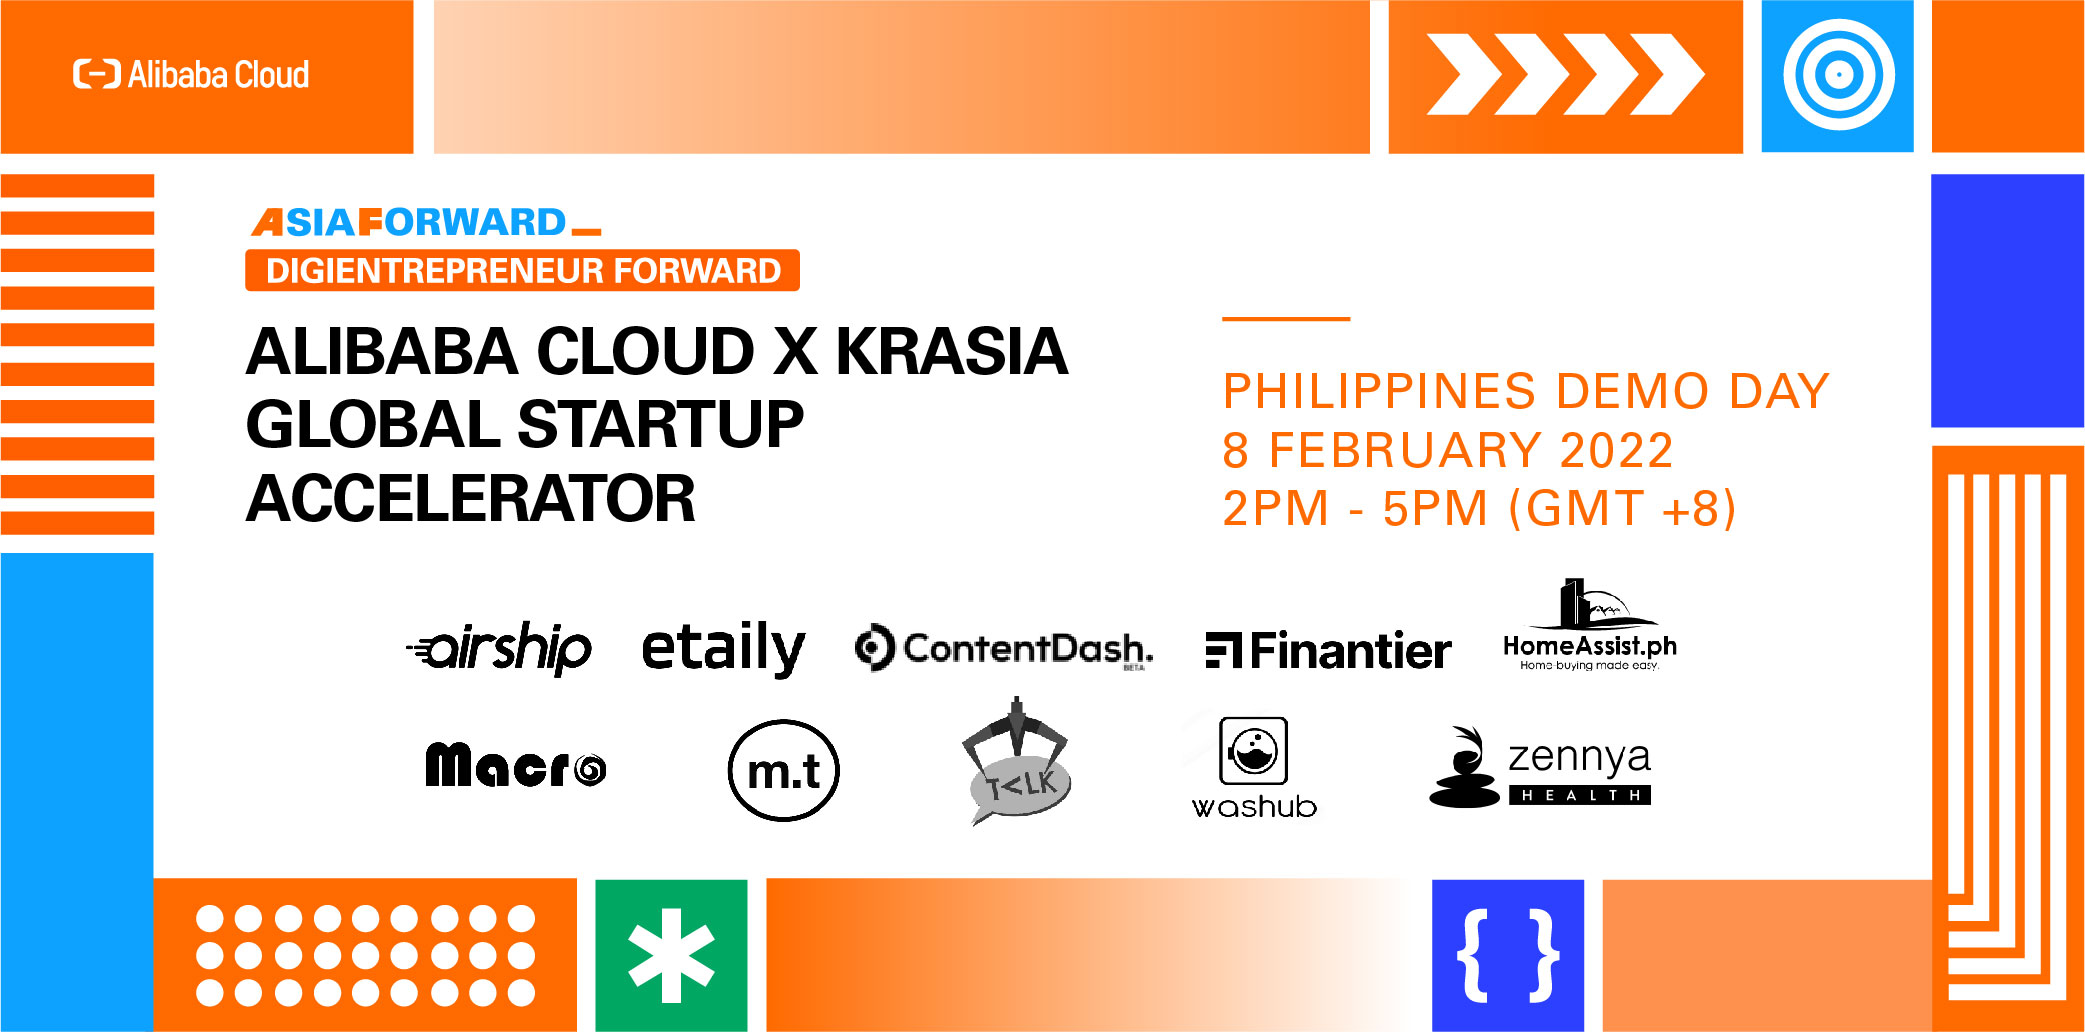 Alibaba Cloud x KrASIA Global Startup Accelerator announces finalists for Philippines Demo Day